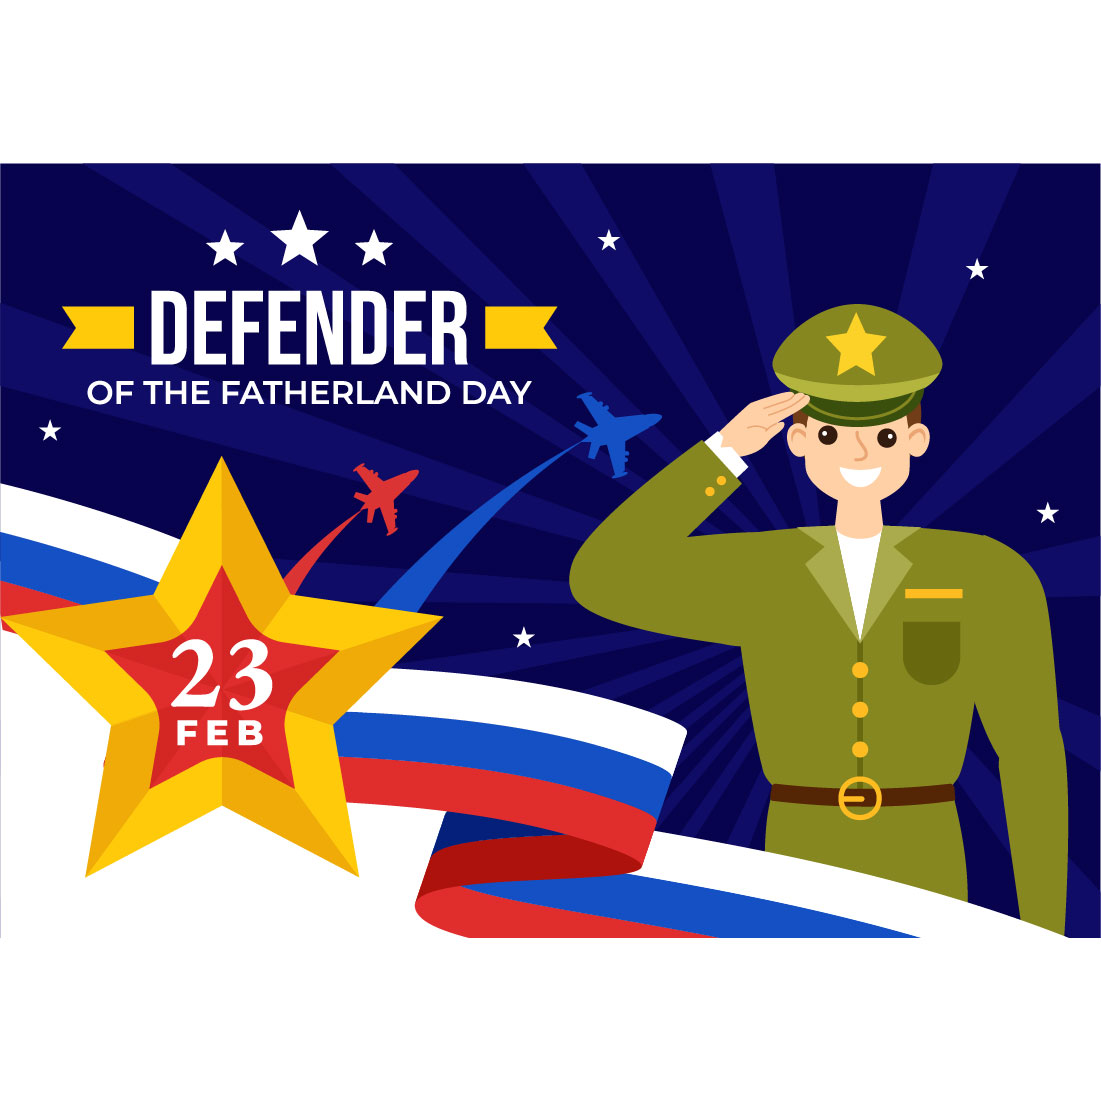 16 Defender of the Fatherland Day of Russia Illustration cover image.